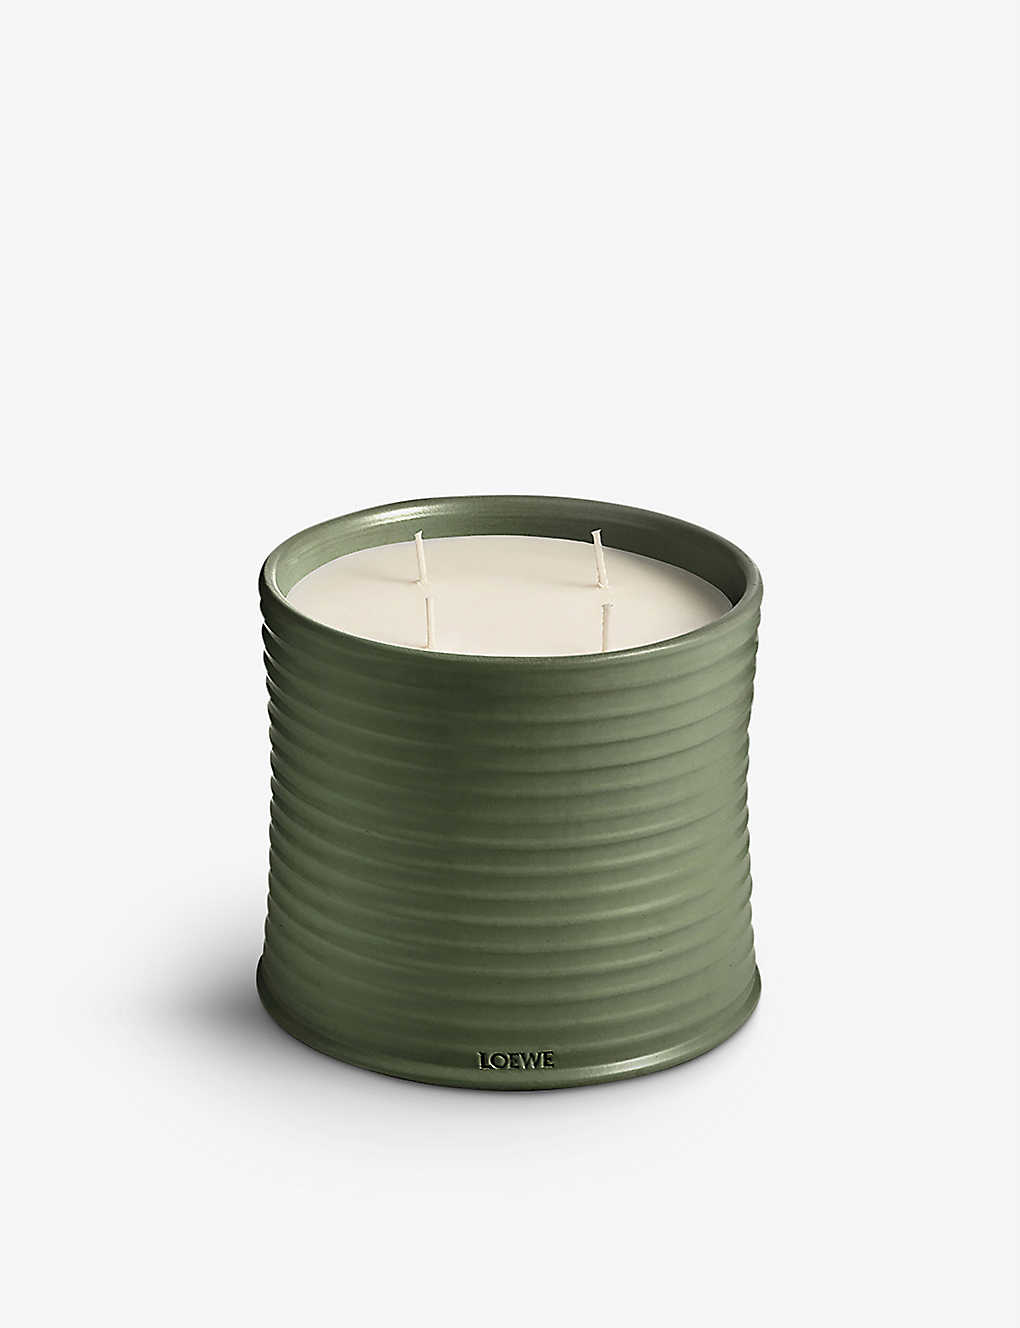 Loewe Scent Of Marihuana Large Scented Candle 2.12kg